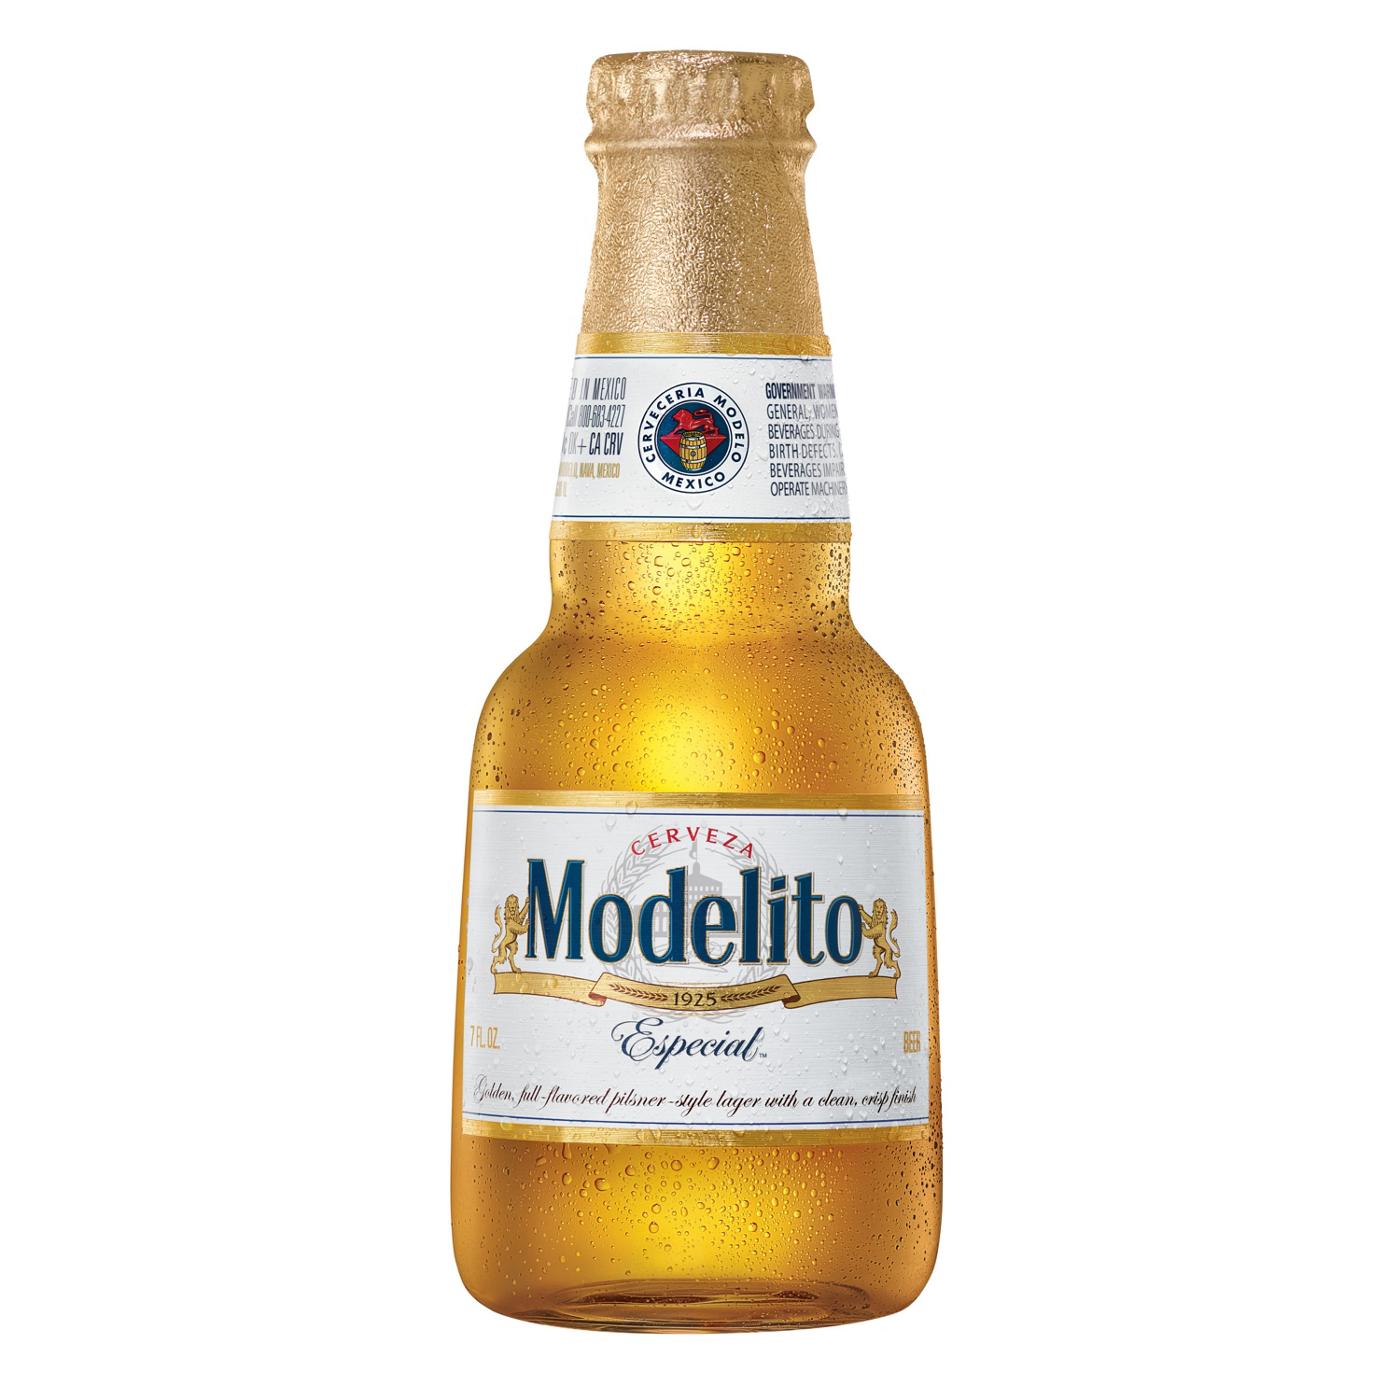 Modelo Especial Modelito Mexican Lager Import Beer 7 oz Bottles, 24 pk; image 4 of 11